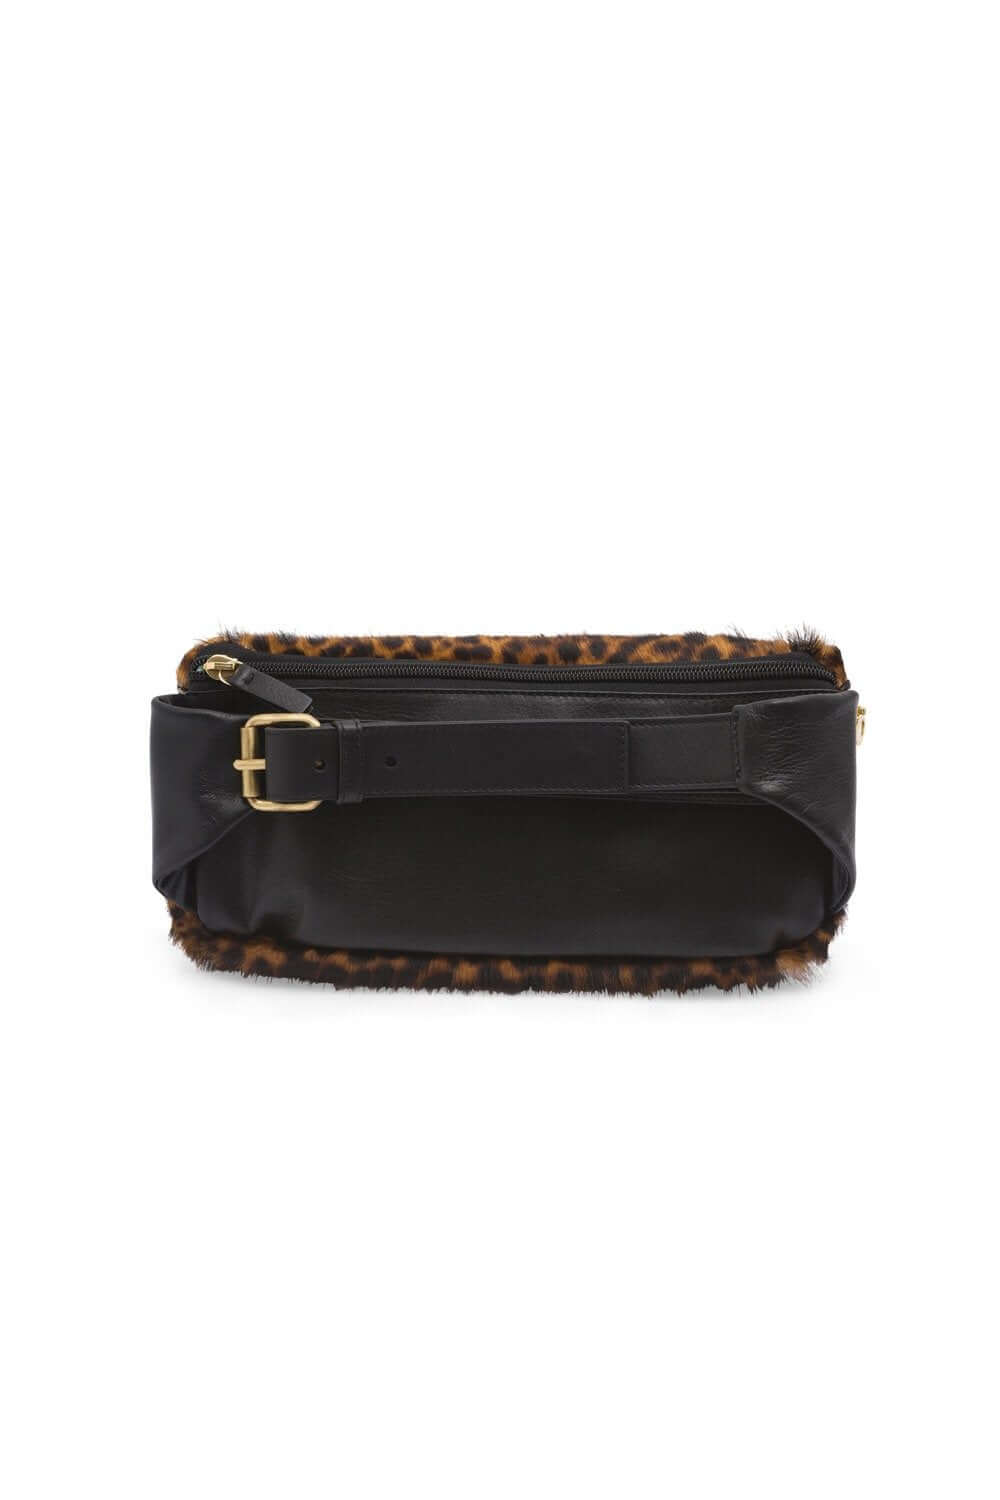 Fanny pack in leopard printed leather